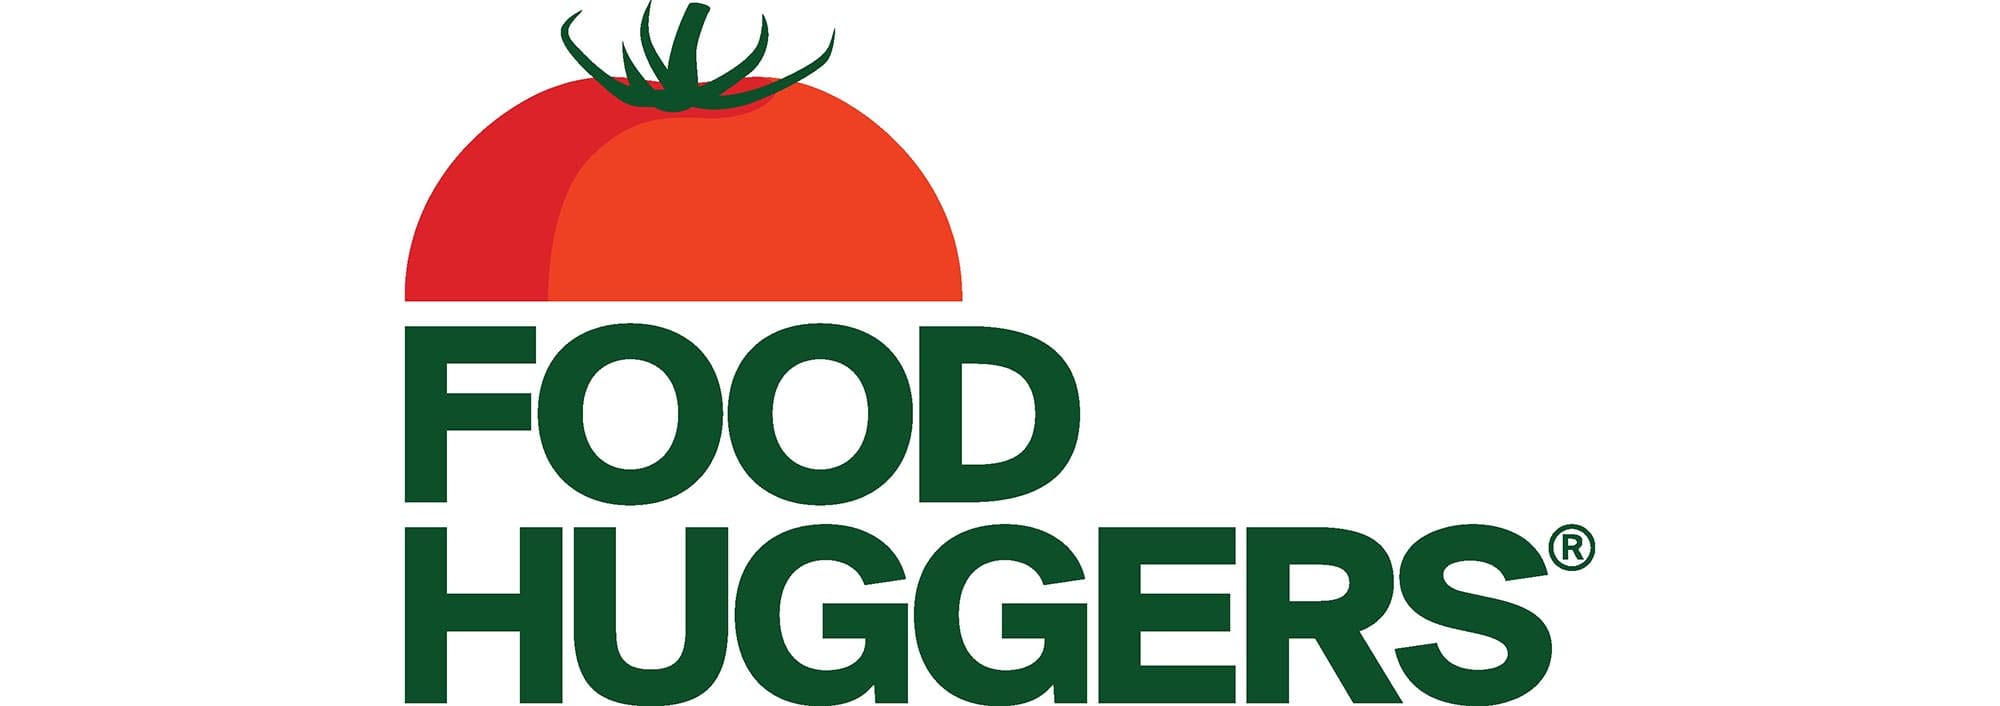 Preserving Freshness and Sustainability: The Food Huggers Story